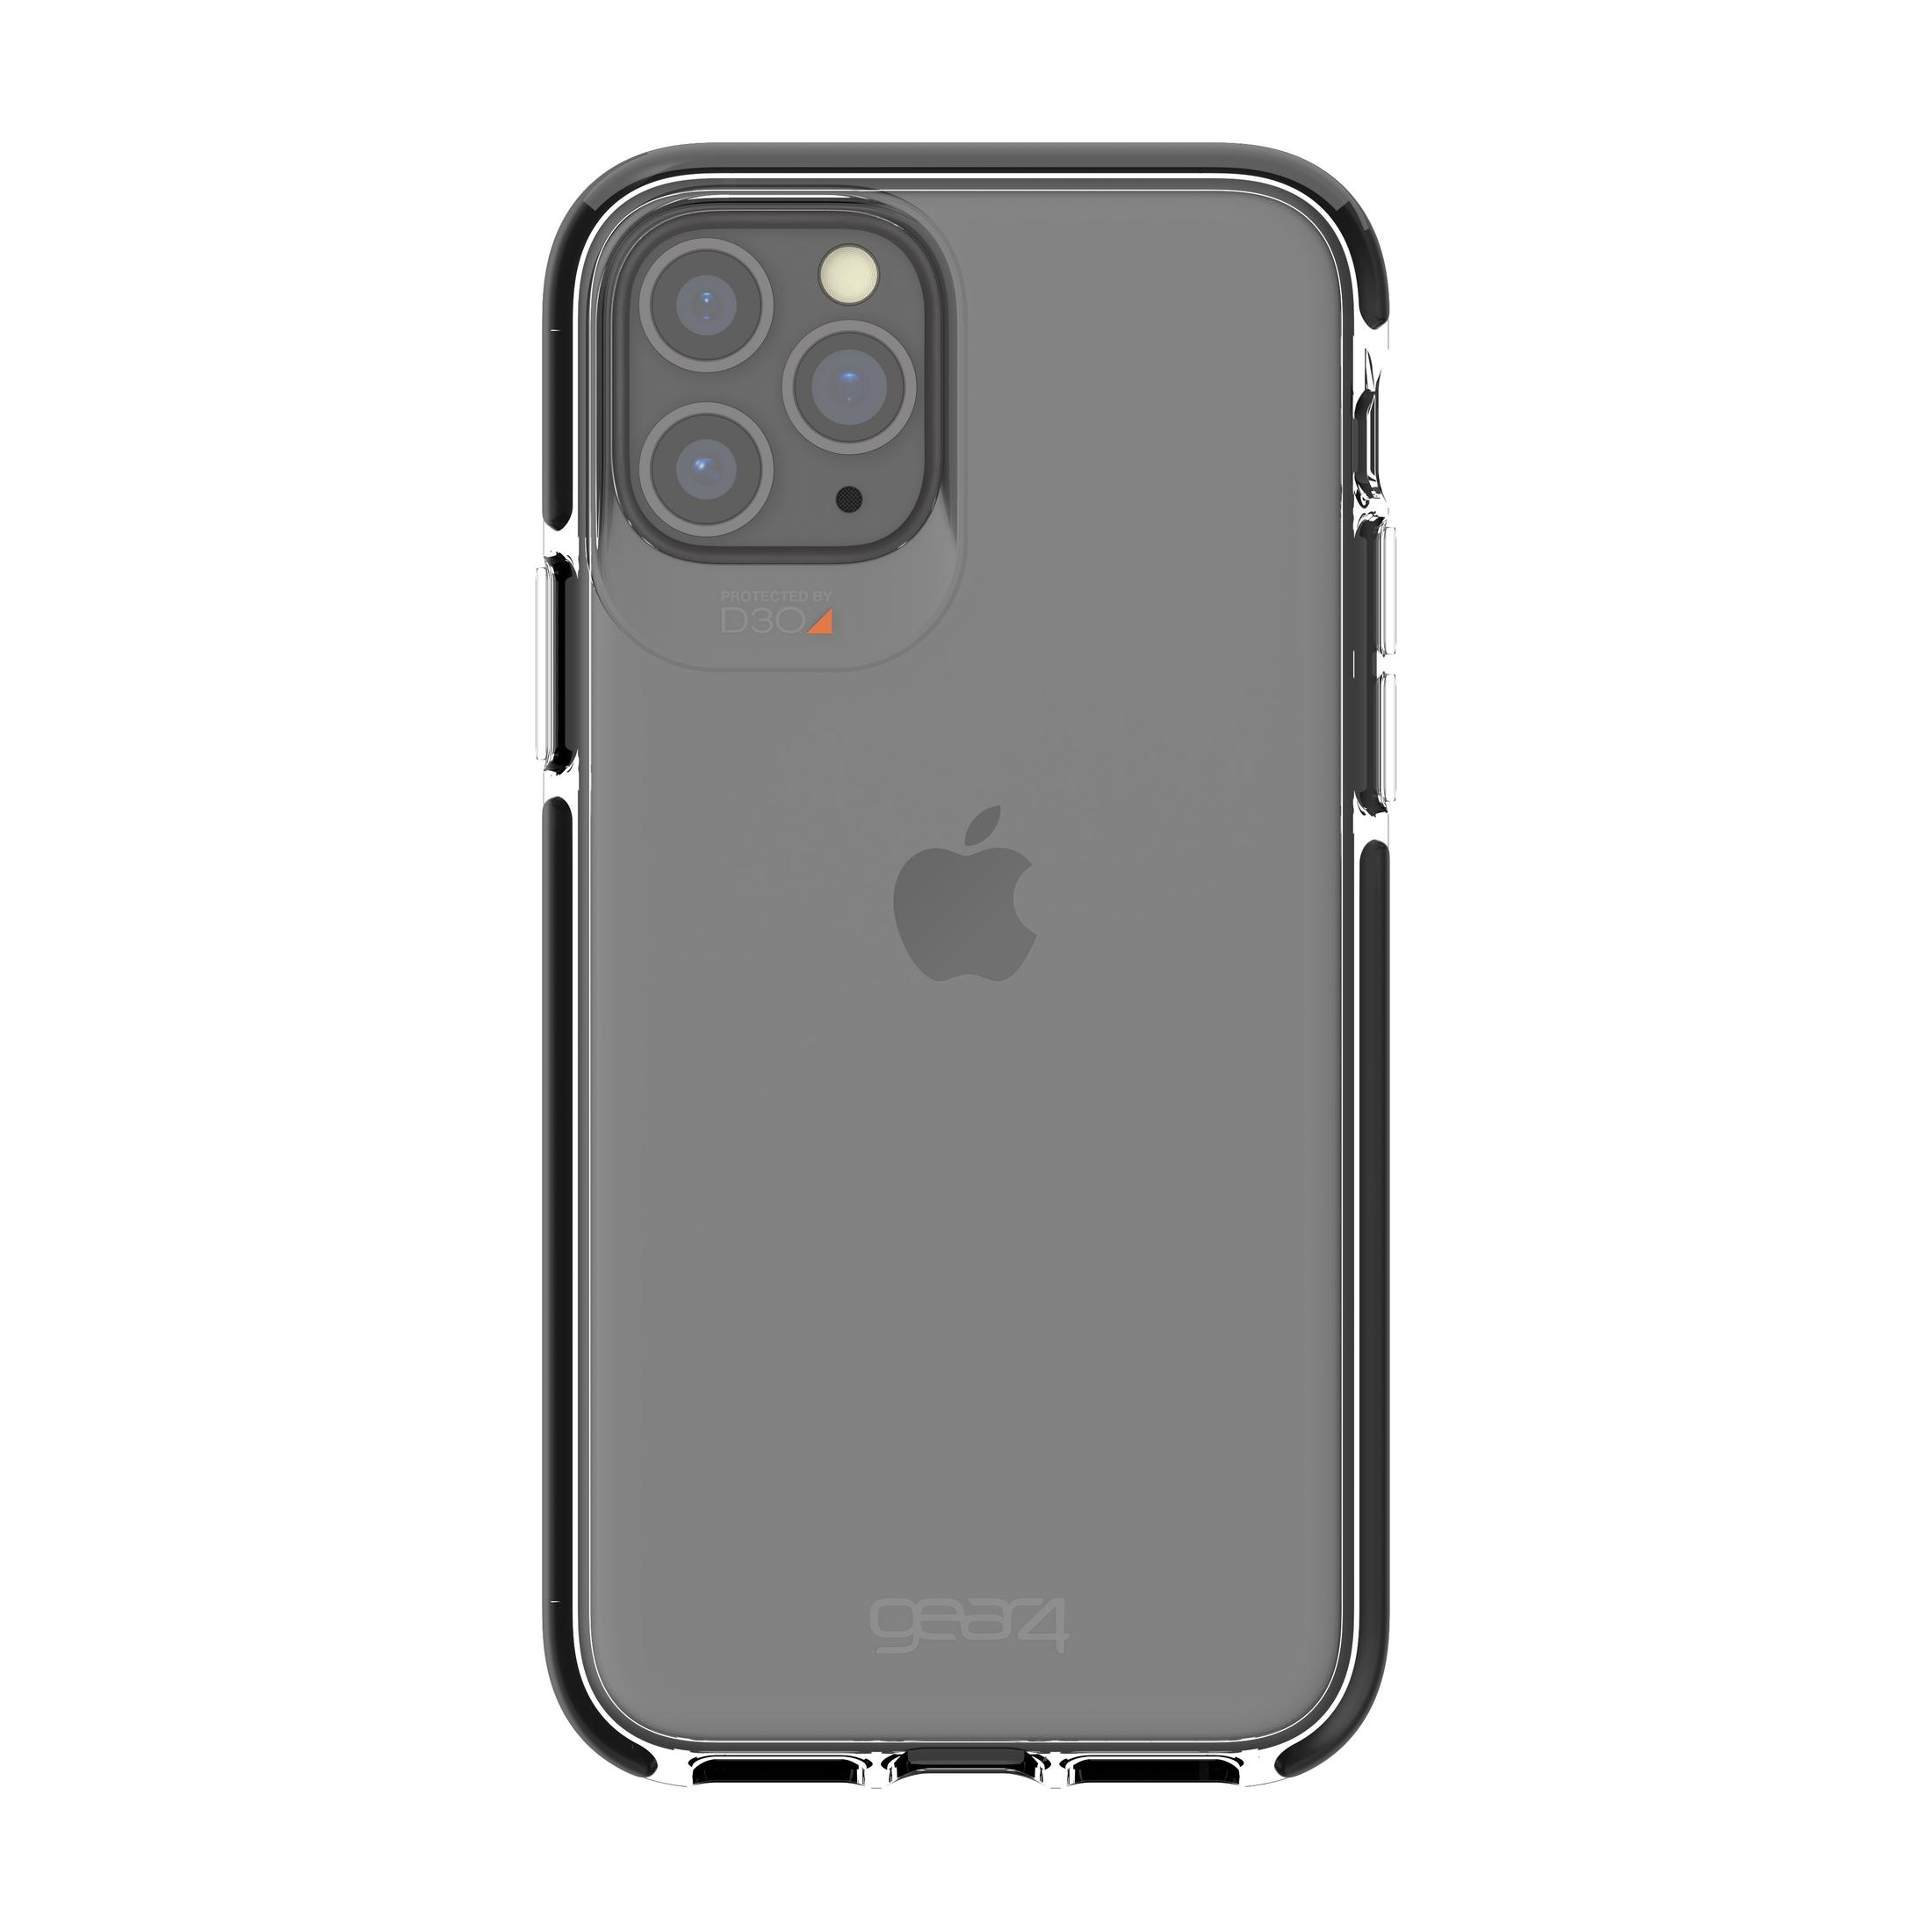 Pro, Apple, Schwarz IPHONE PRO (BLACK), 11 11 Backcover, 0S32919 iPhone PICCADILLY GEAR4